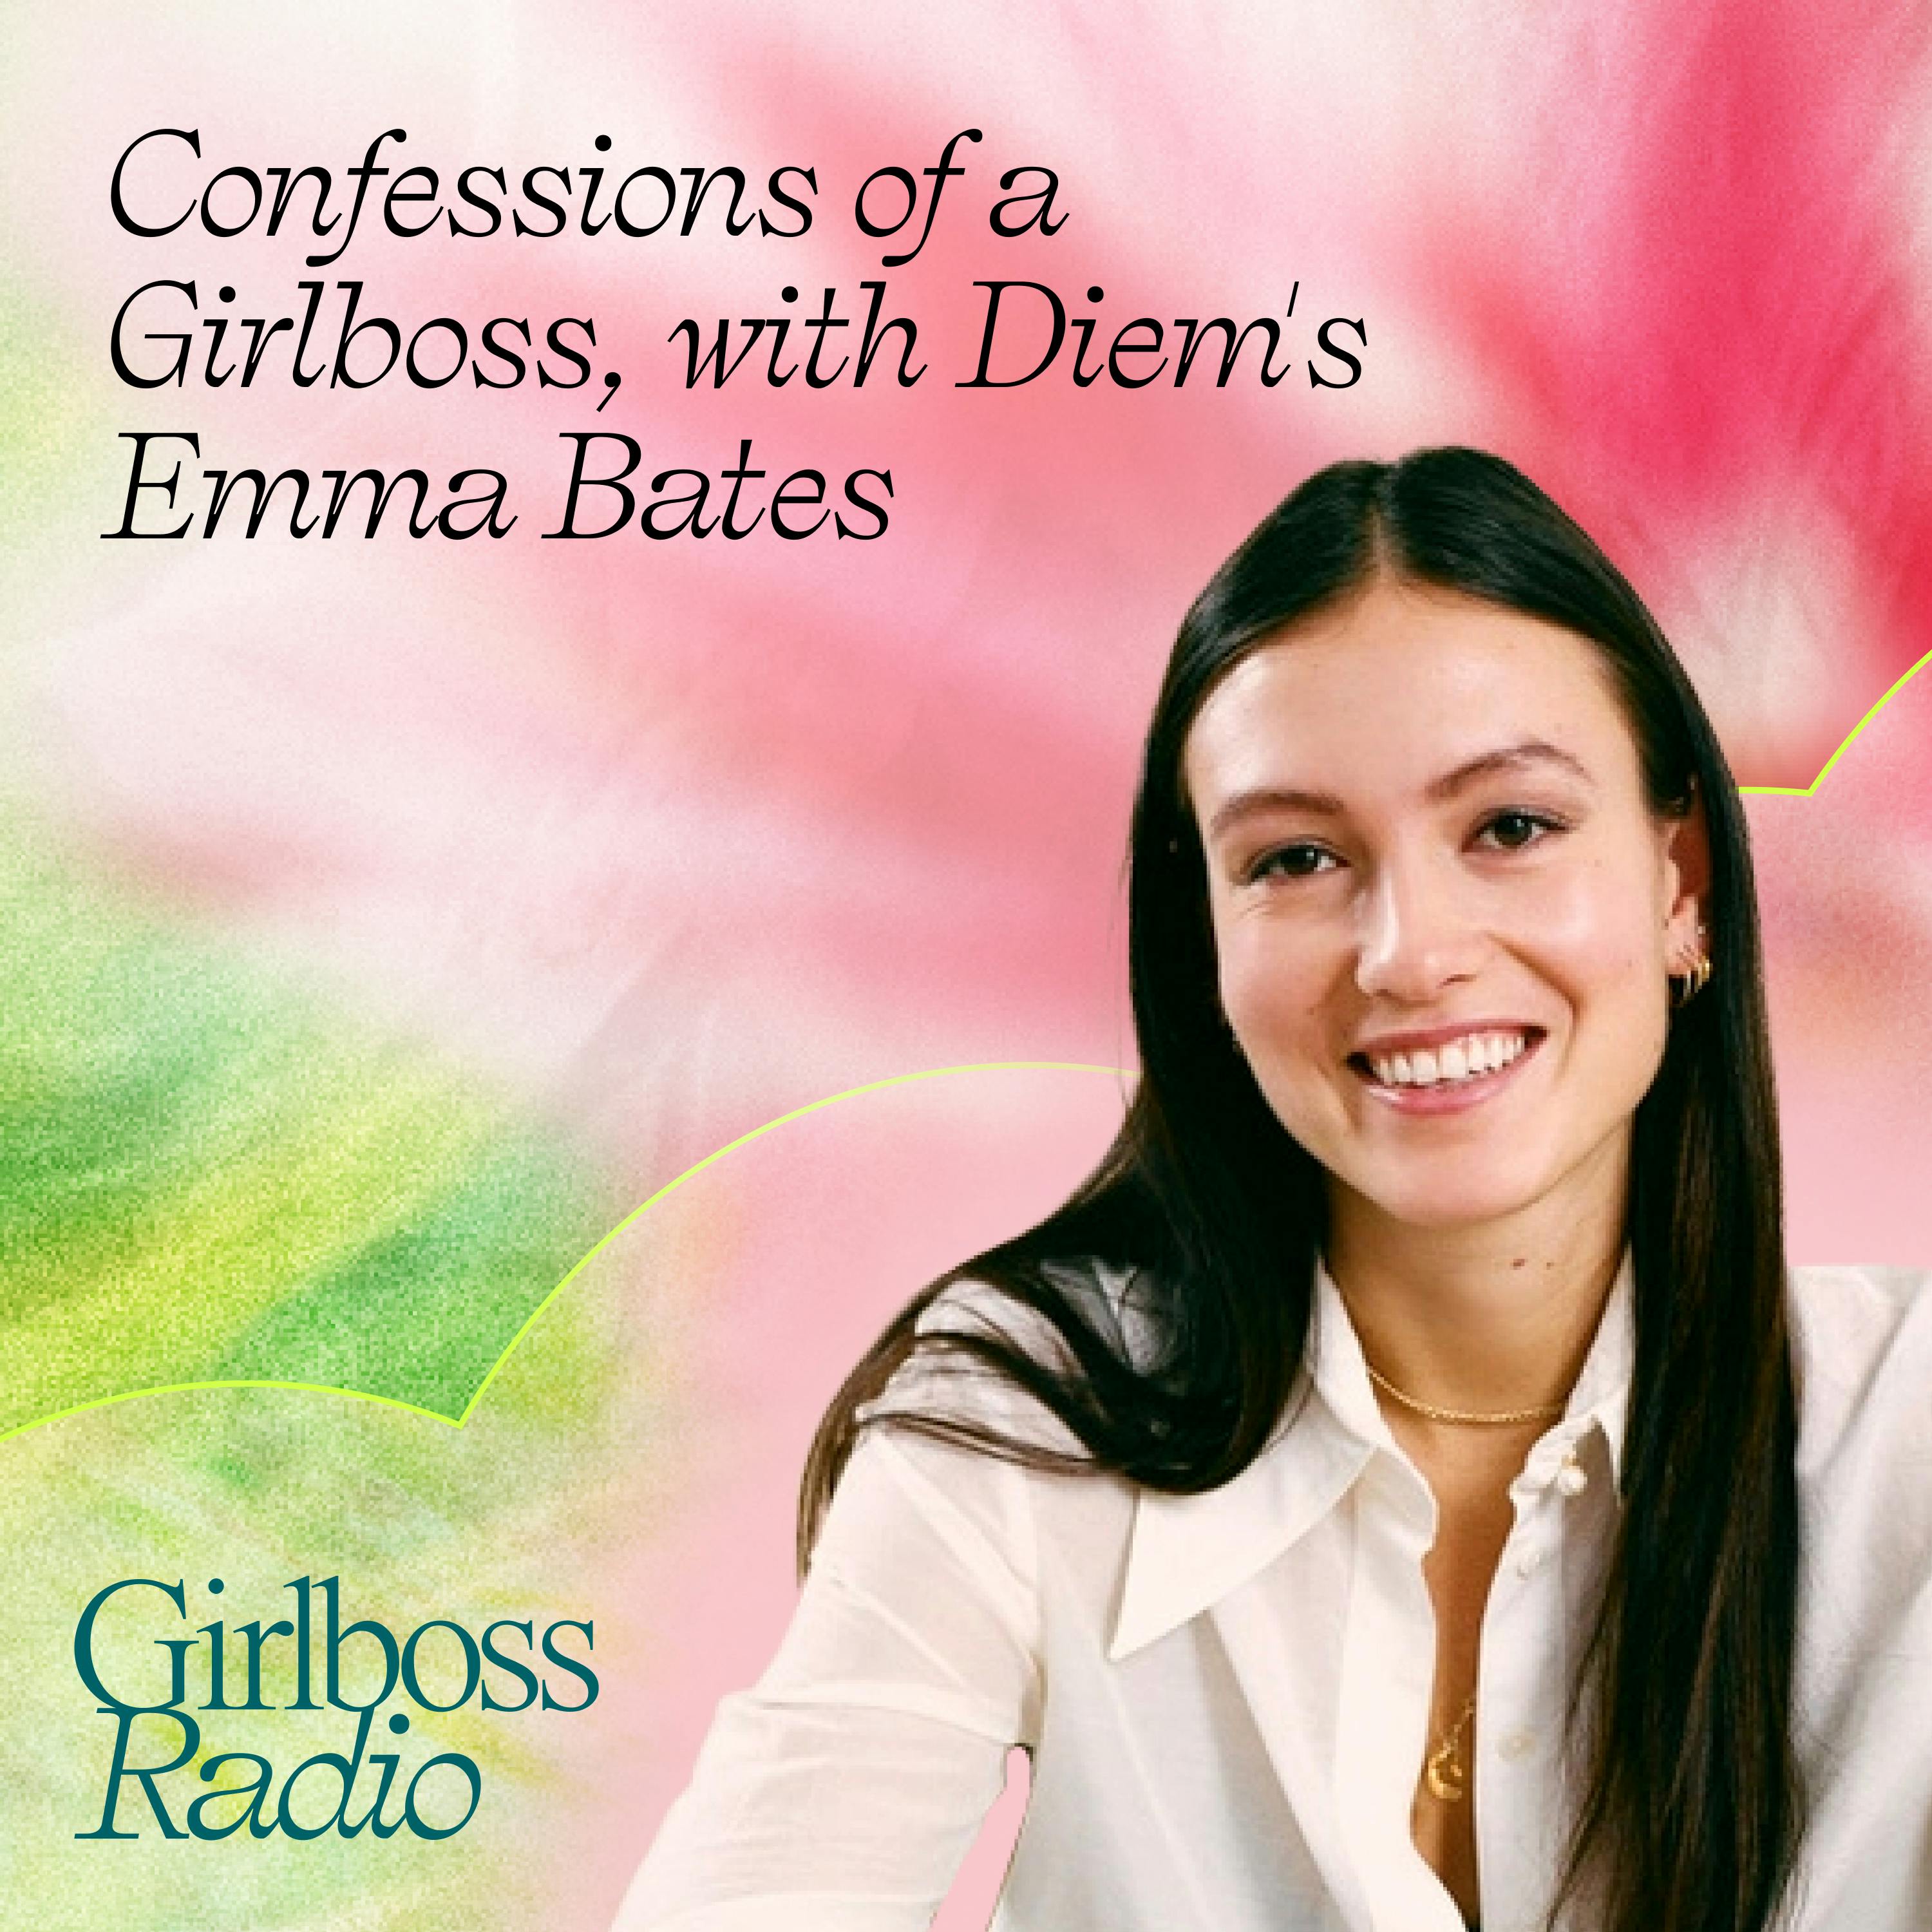 Confessions of a Girlboss, with Diem’s Emma Bates